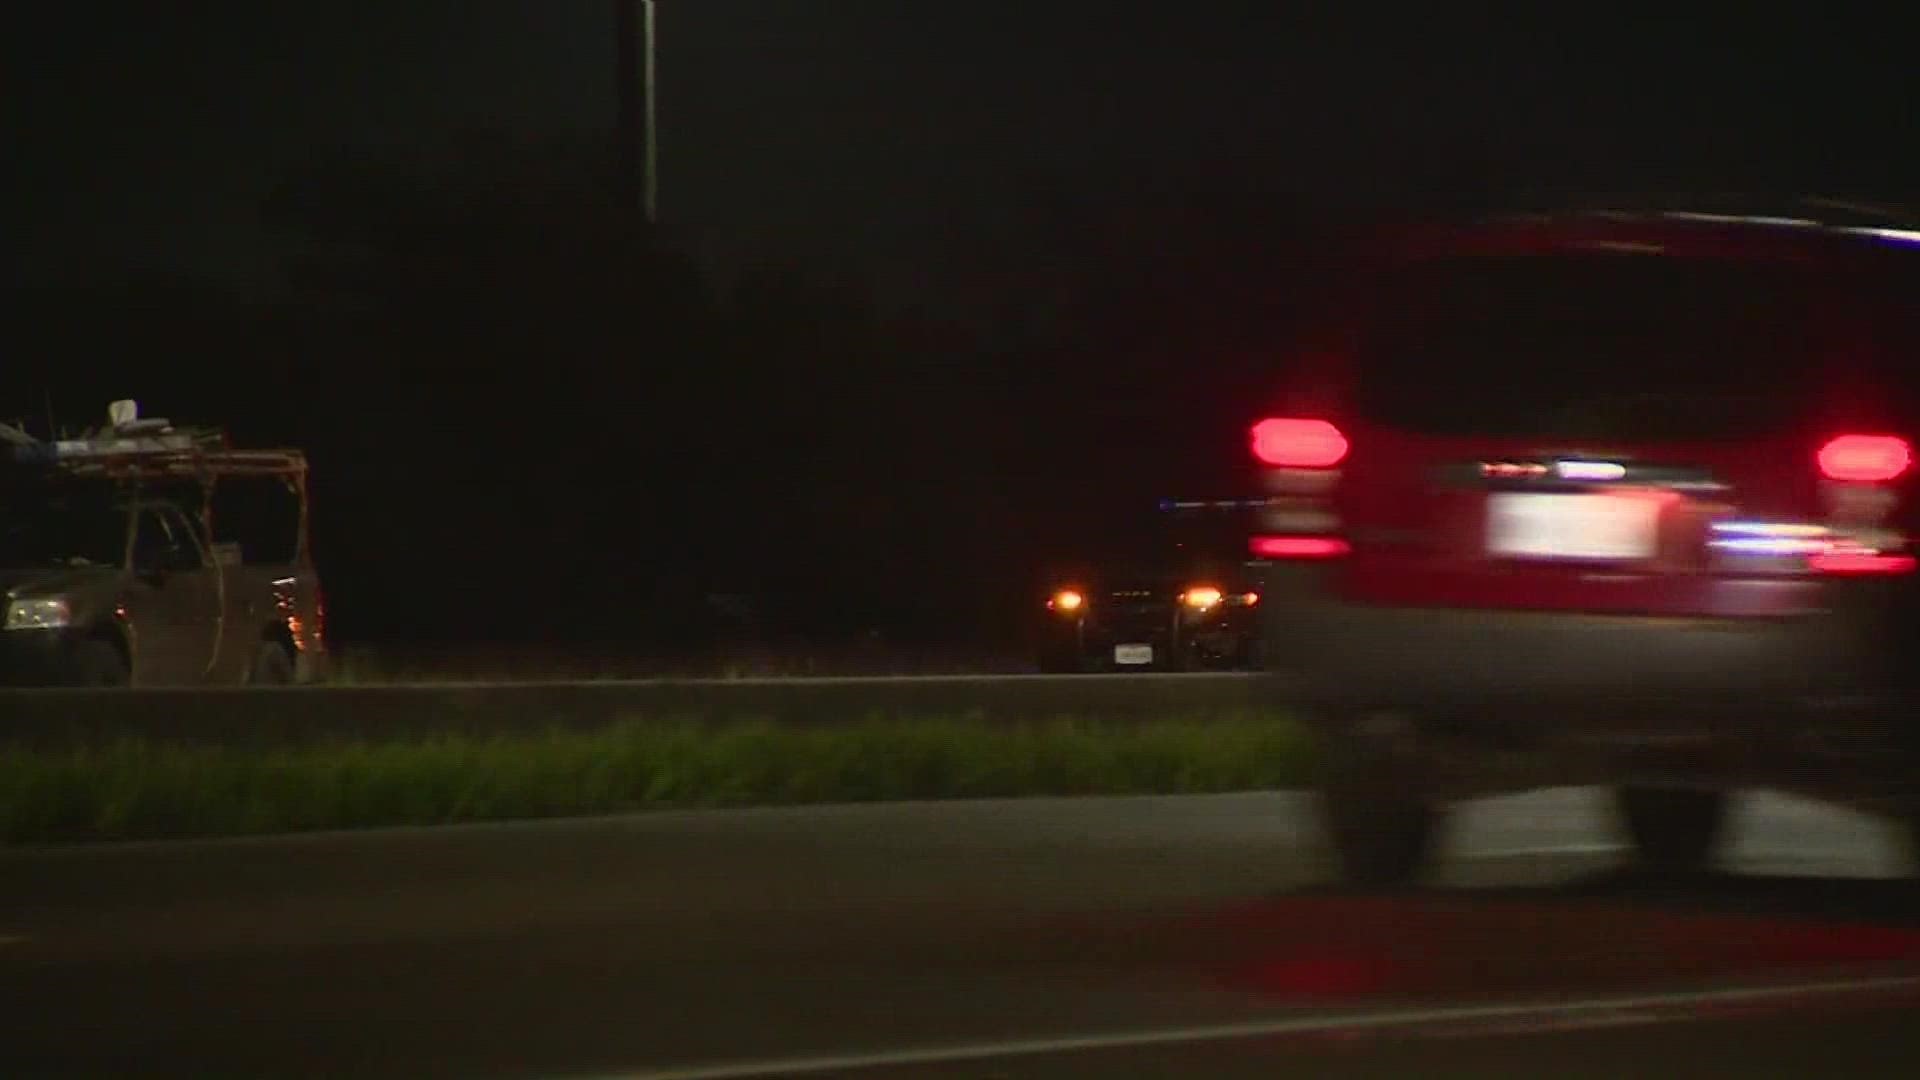 Police are investigating after a man was hit and killed by a car after pulling over to the side of the highway at I-37 and Loop 410 early Friday morning.